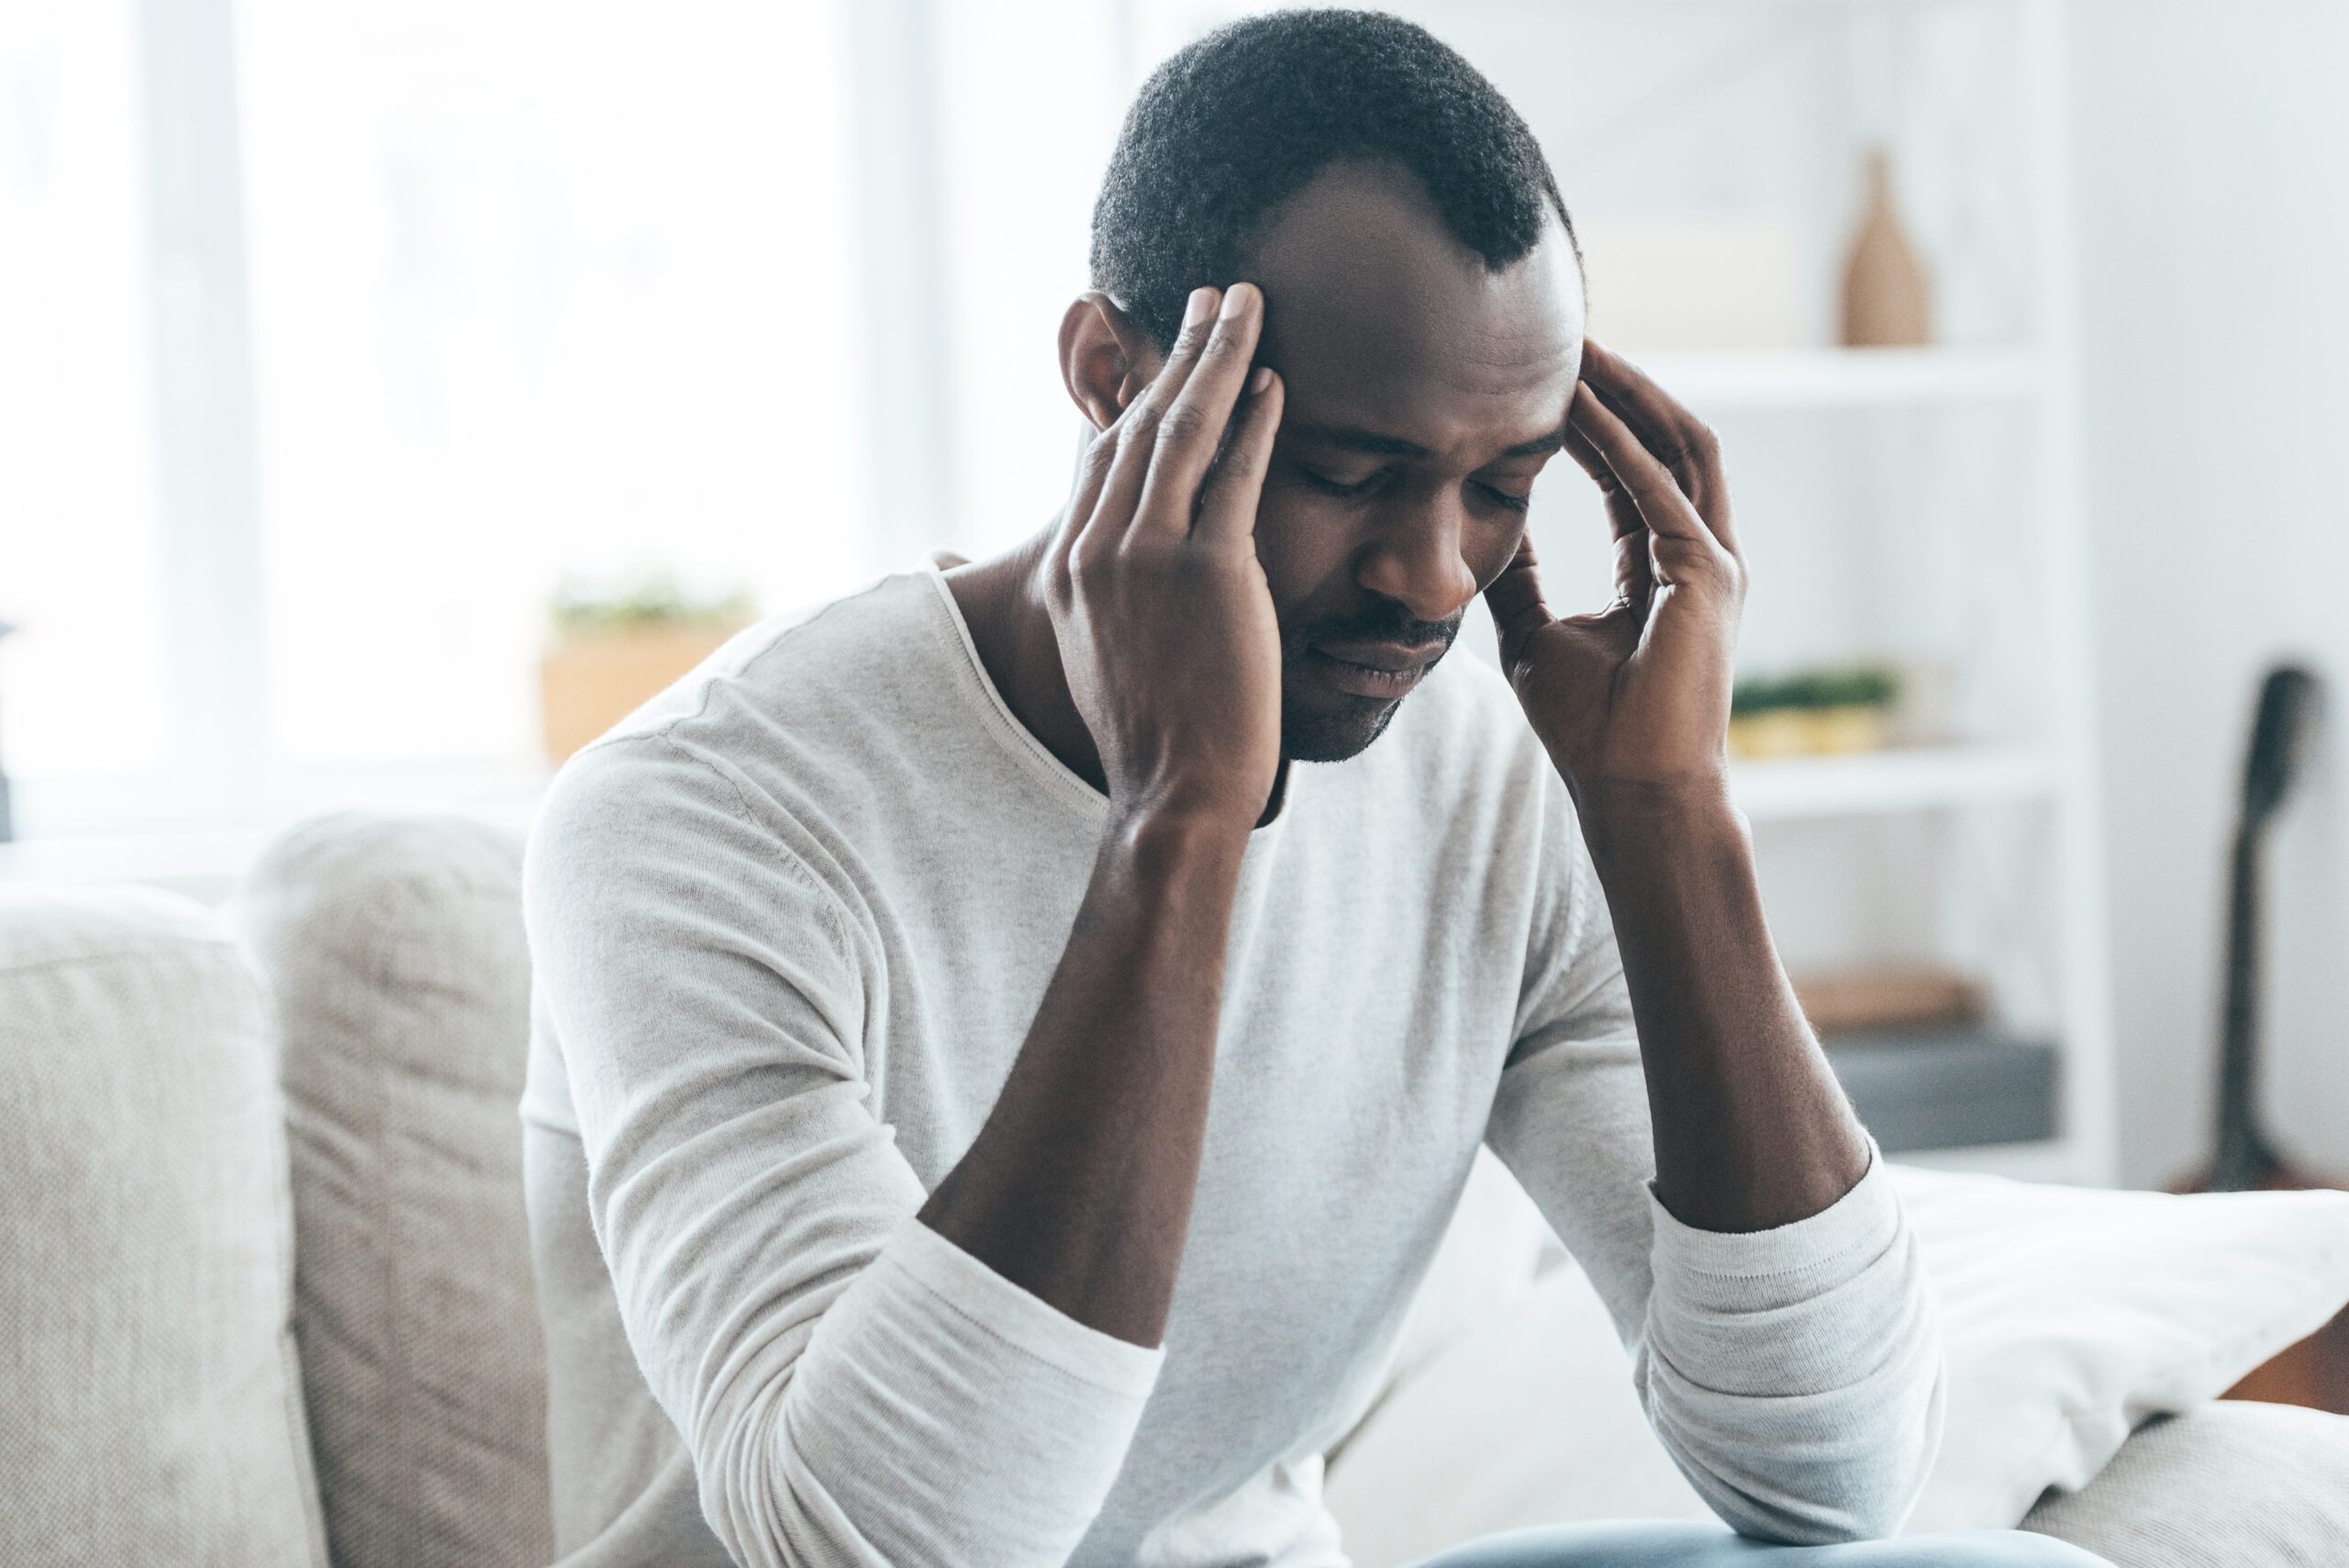 People with chronic migraines know they can have a major impact on how you live your life, but functional nutritionists can help create a diet that will help reduce or eliminate your migraines